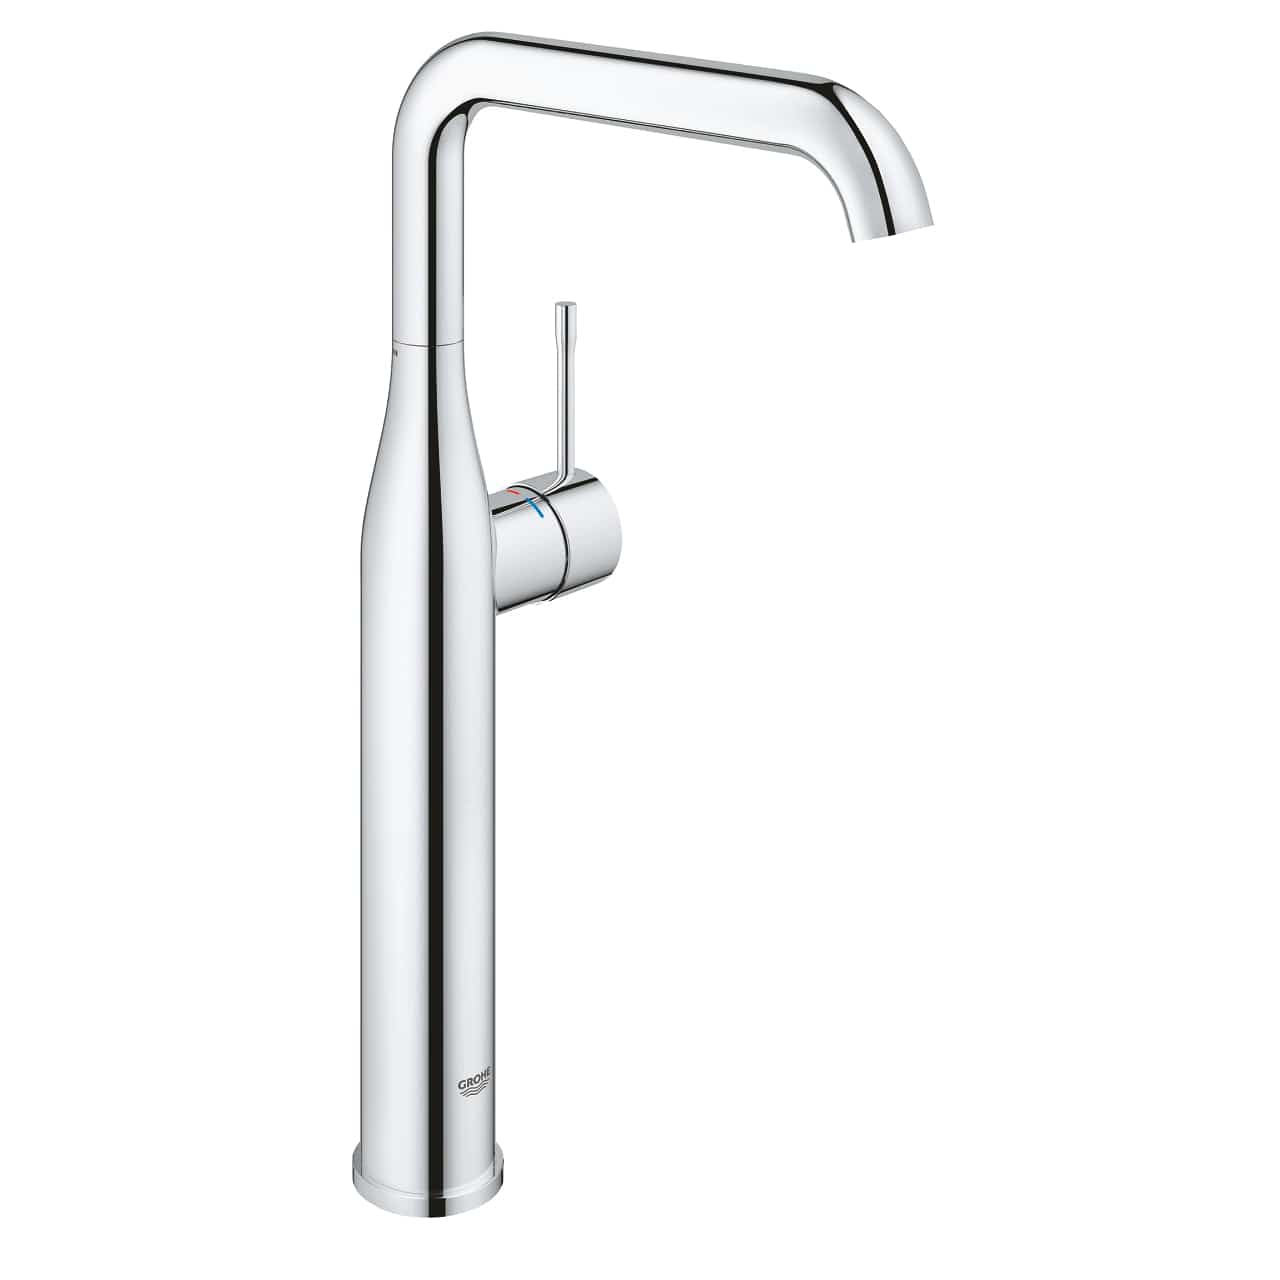 Grohe Essence Basin Mixer 1/2″ XL-Size, Chrome | Supply Master | Accra, Ghana Bathroom Faucet Buy Tools hardware Building materials